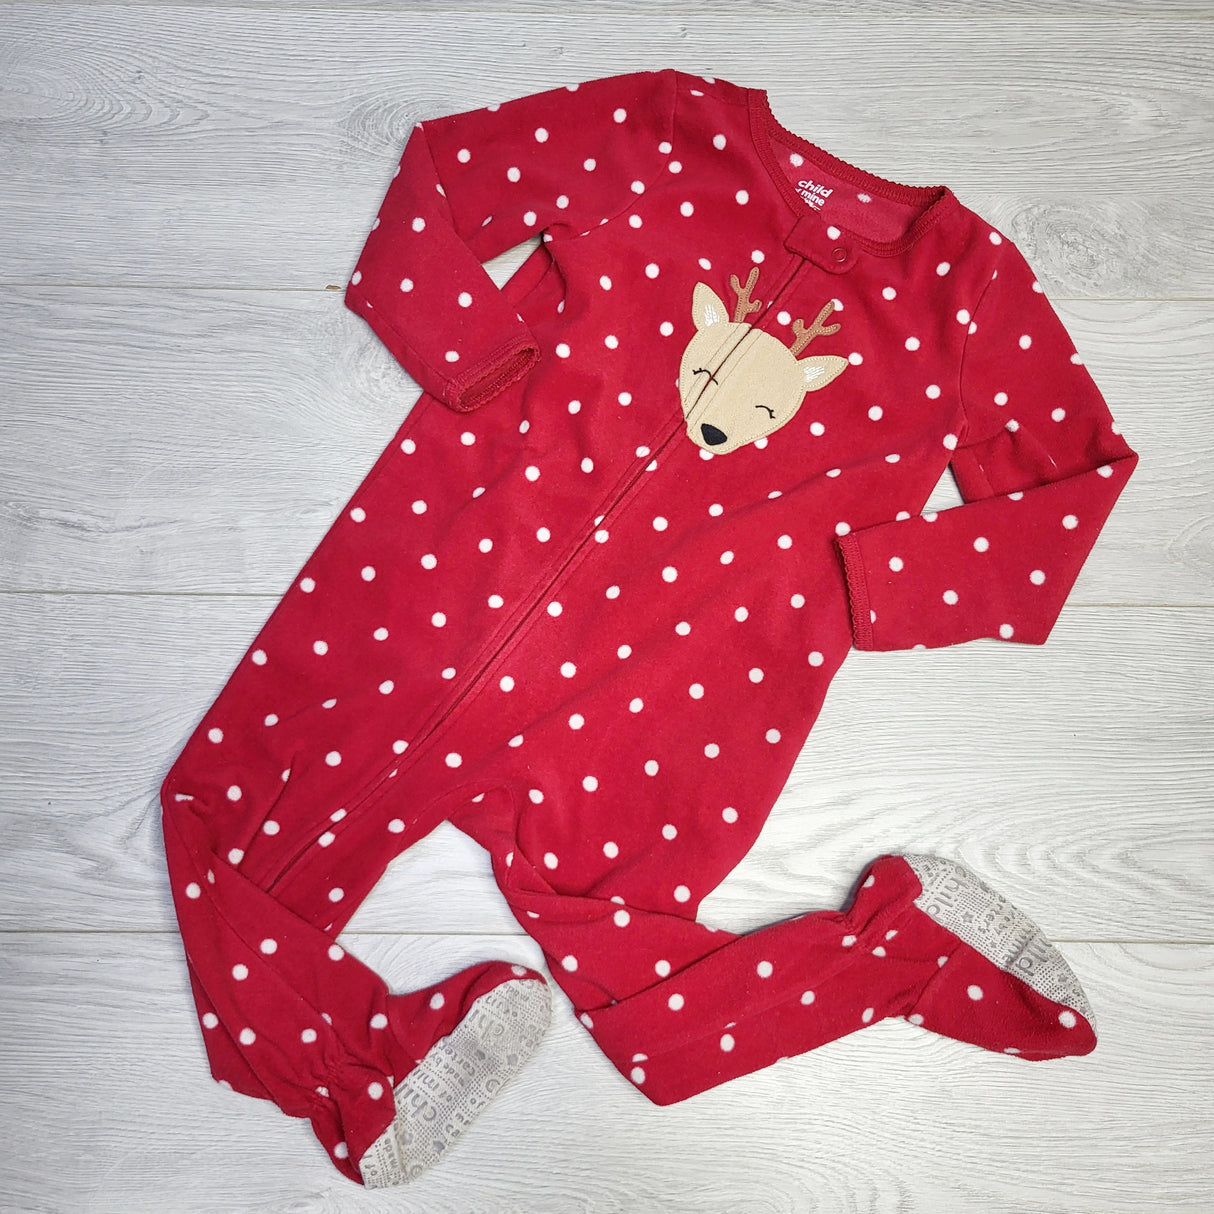 CRTH1 - Child of Mine red polka zippered fleece sleeper with reindeer. Size 2T